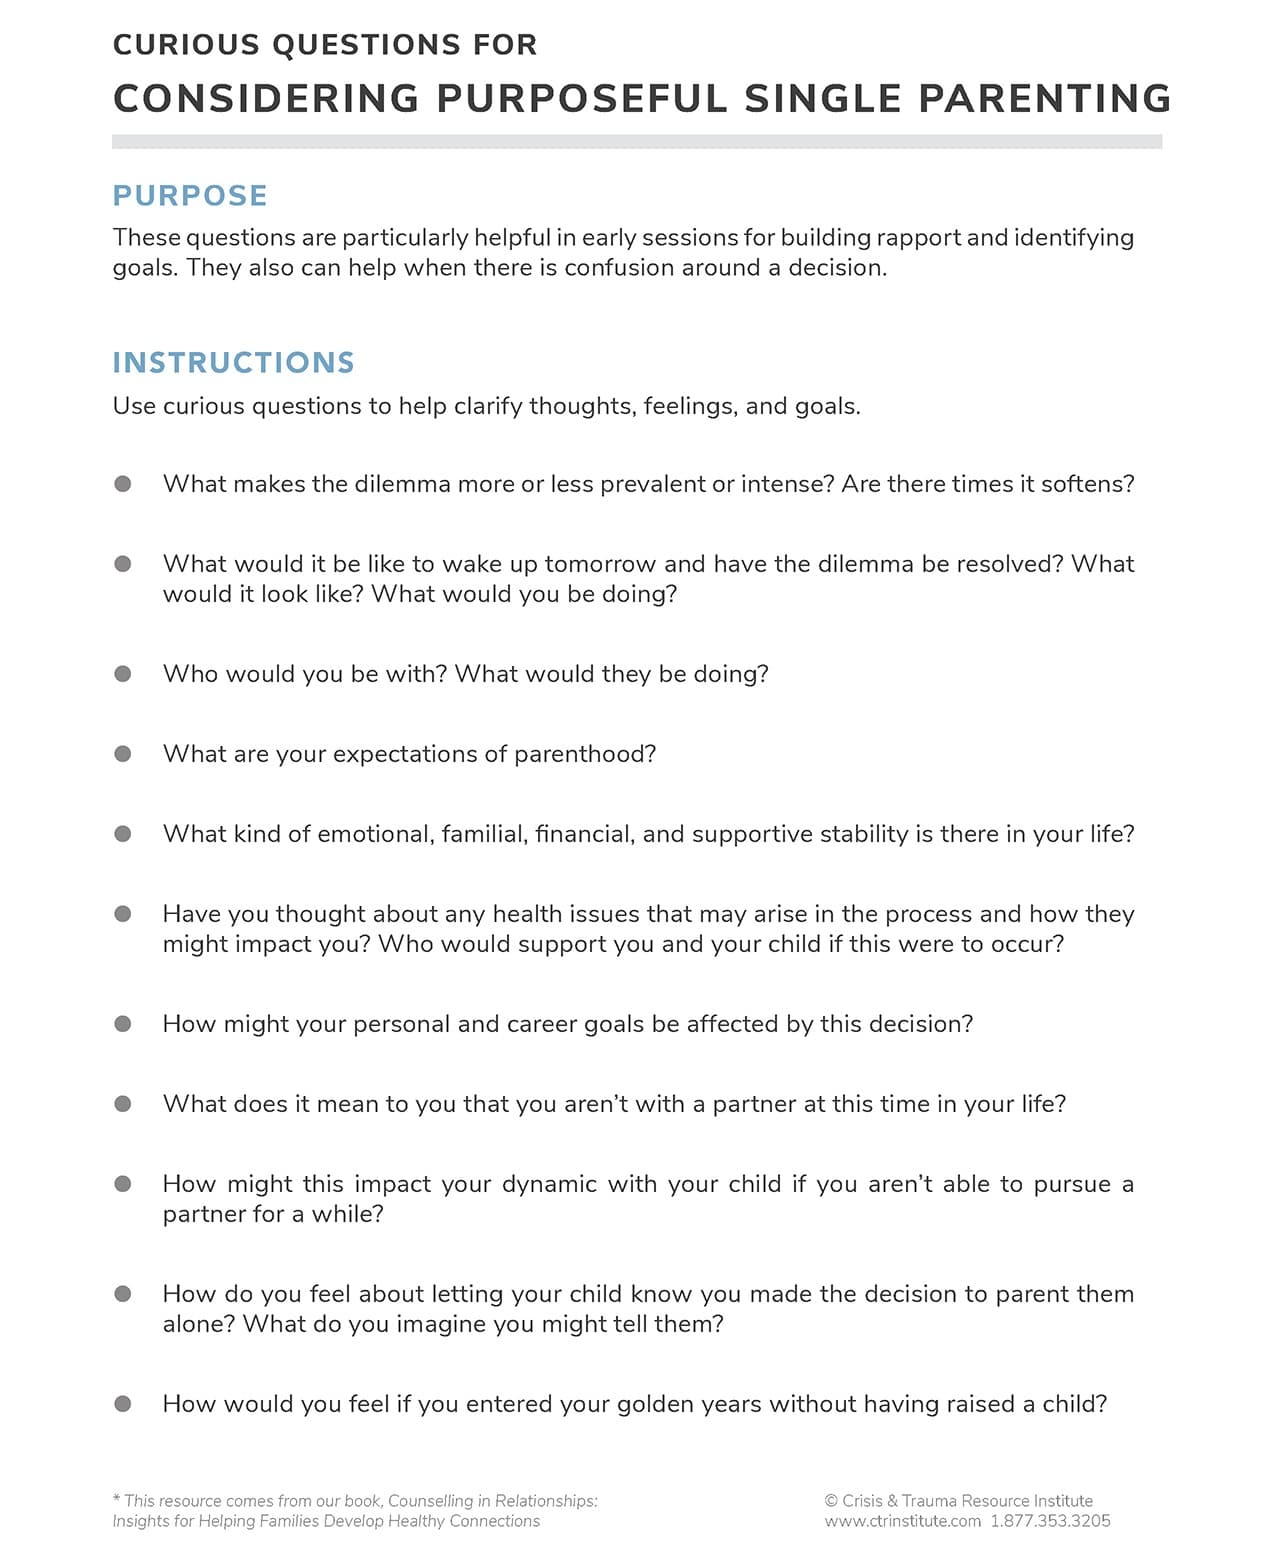 Image of Free Printable Handout for Considering Purposeful Single Parenting